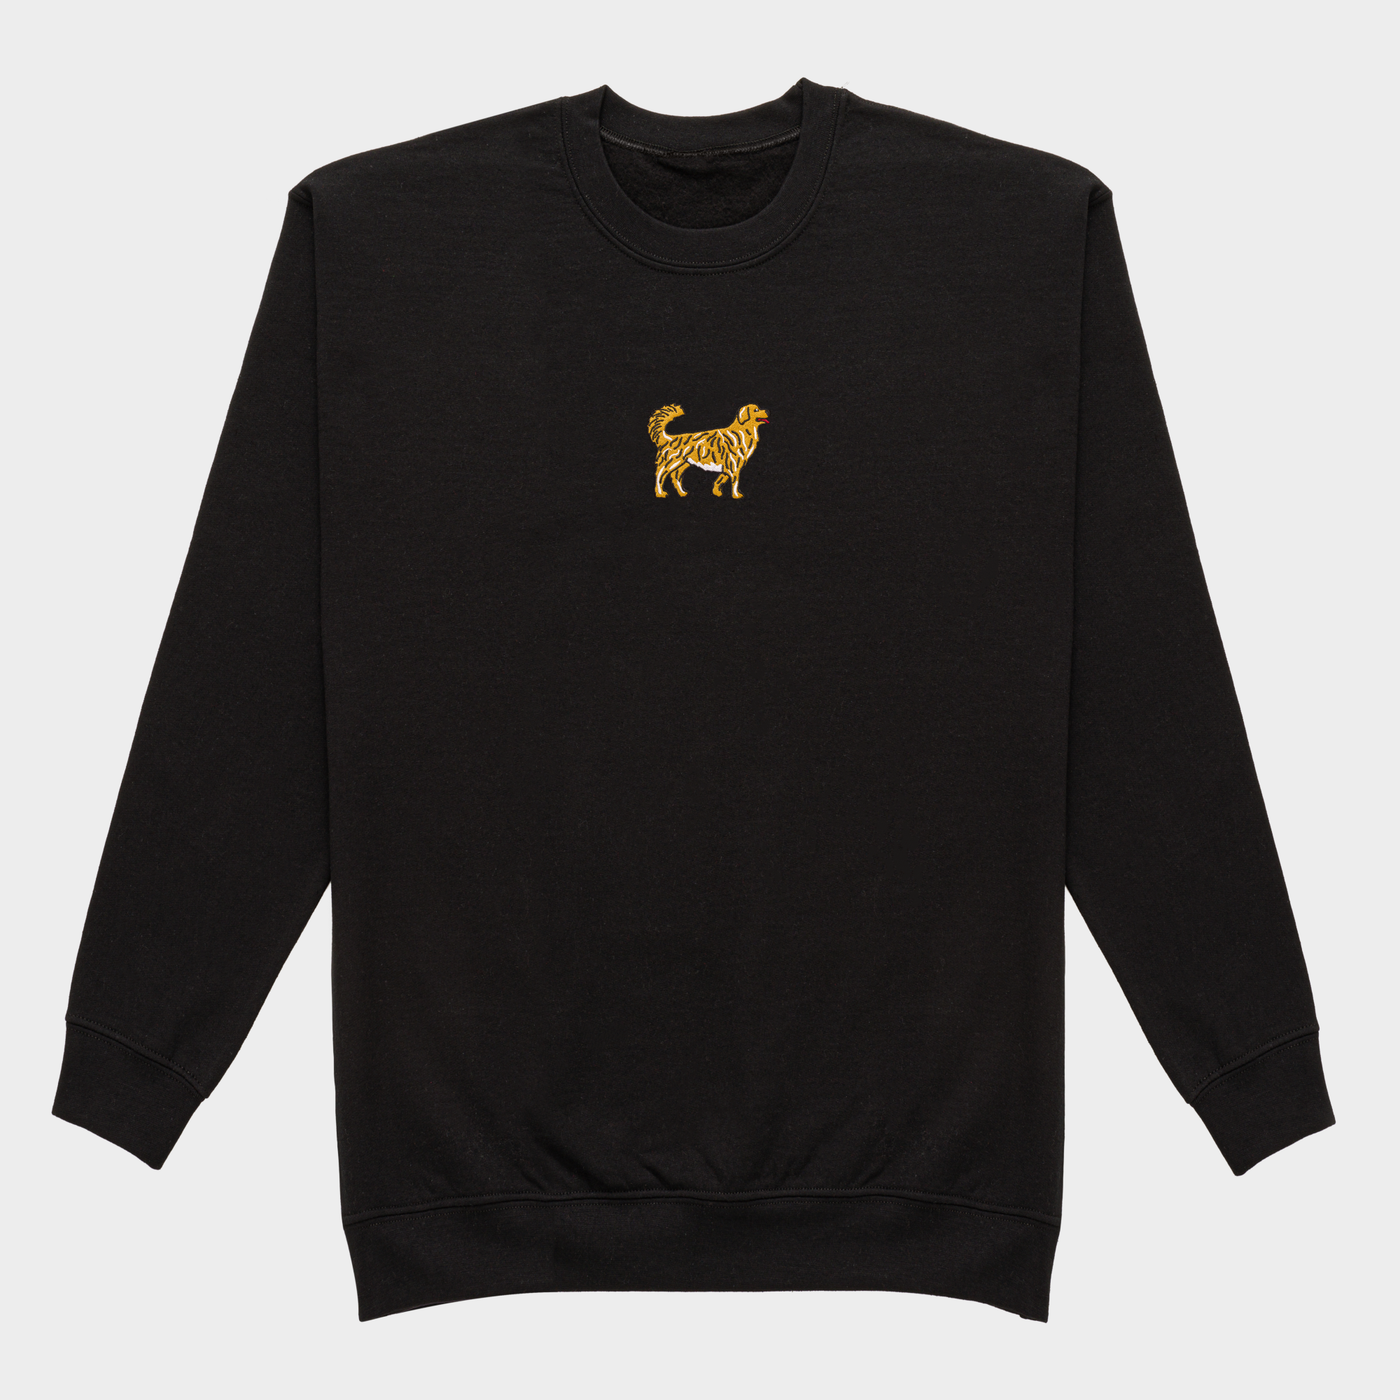 Bobby's Planet Men's Embroidered Golden Retriever Sweatshirt from Paws Dog Cat Animals Collection in Black Color#color_black